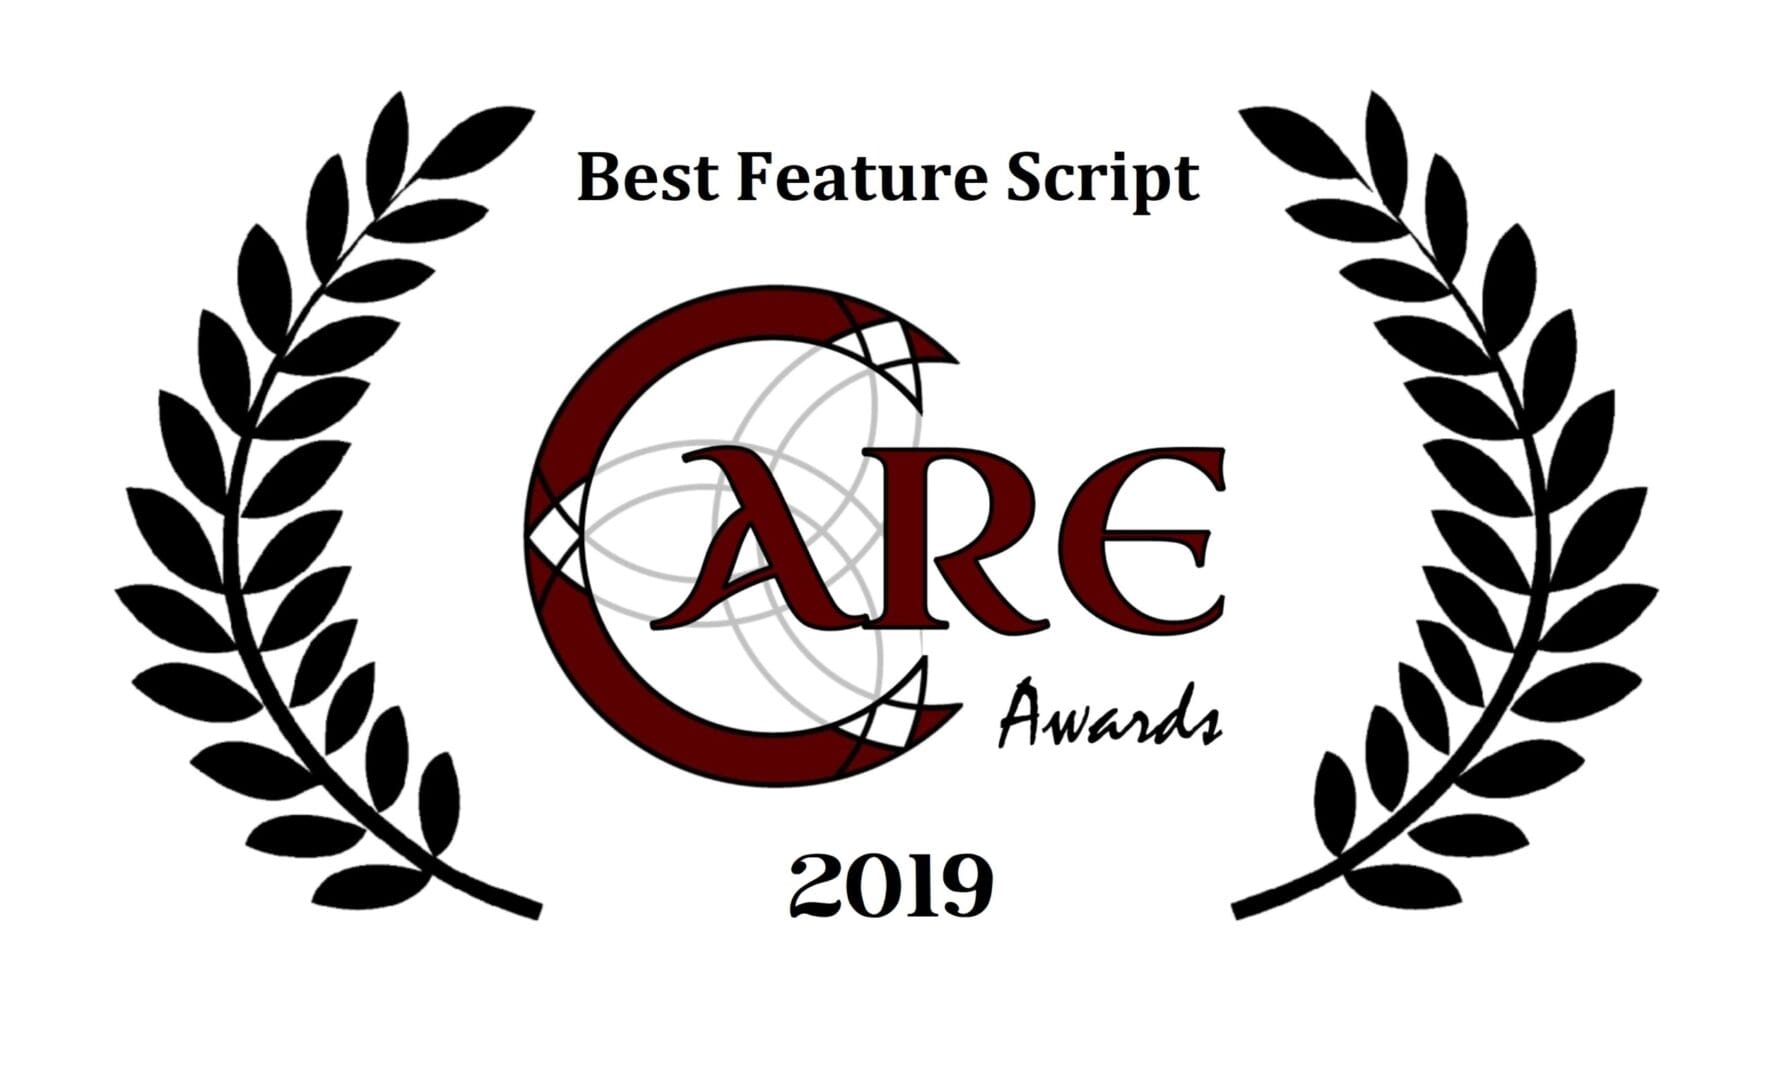 Care Awards for best feature script